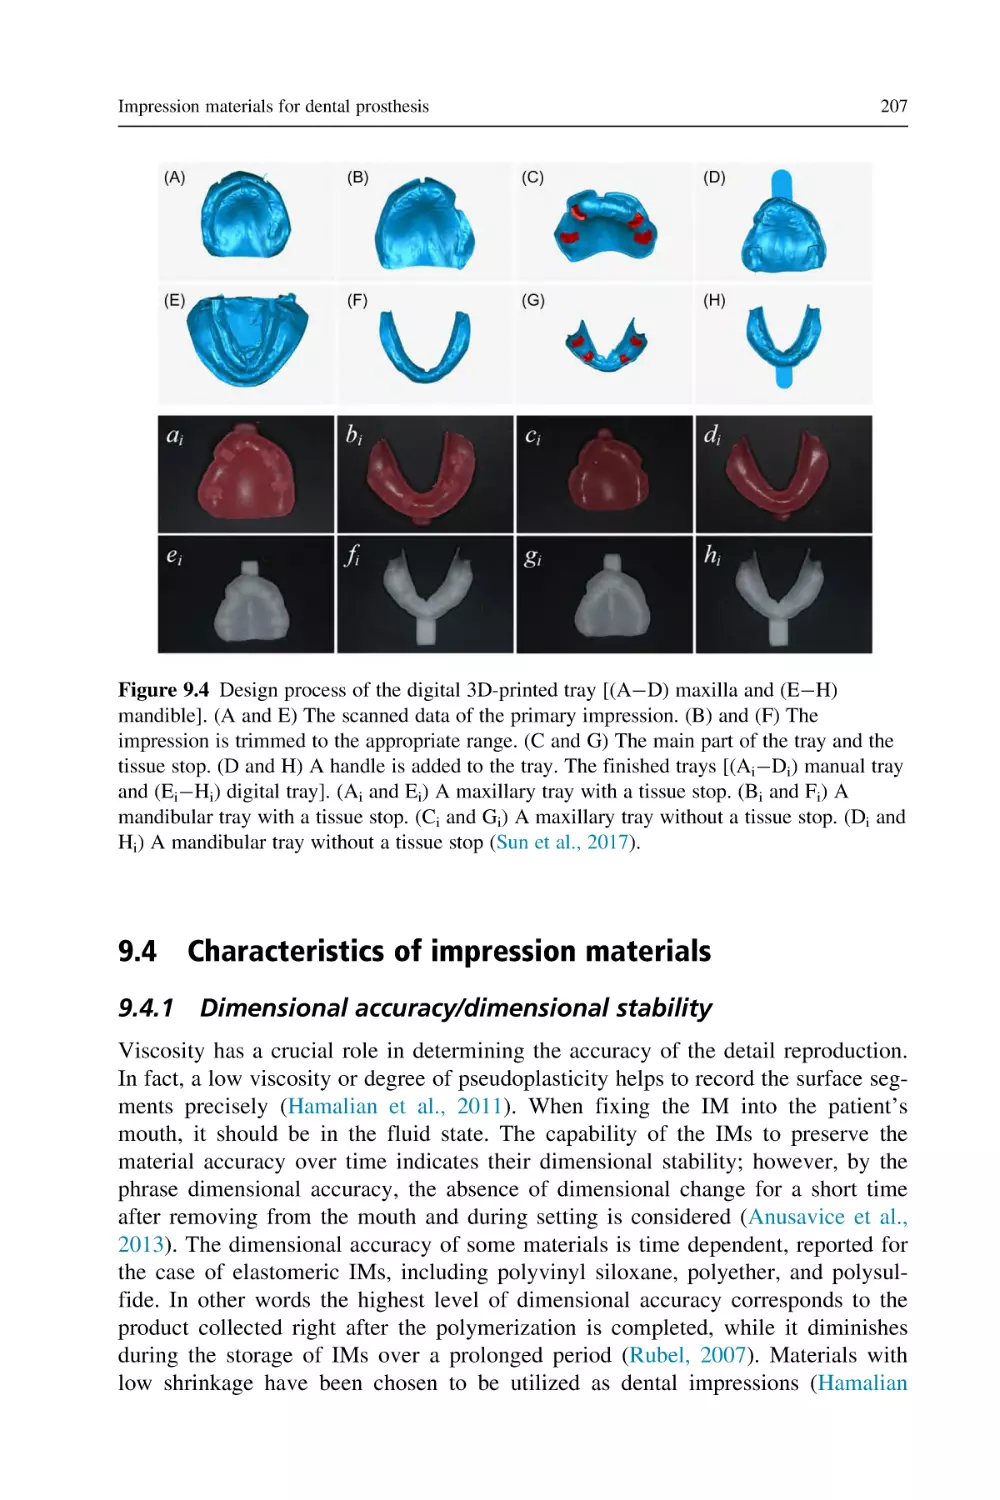 9.4 Characteristics of impression materials
9.4.1 Dimensional accuracy/dimensional stability